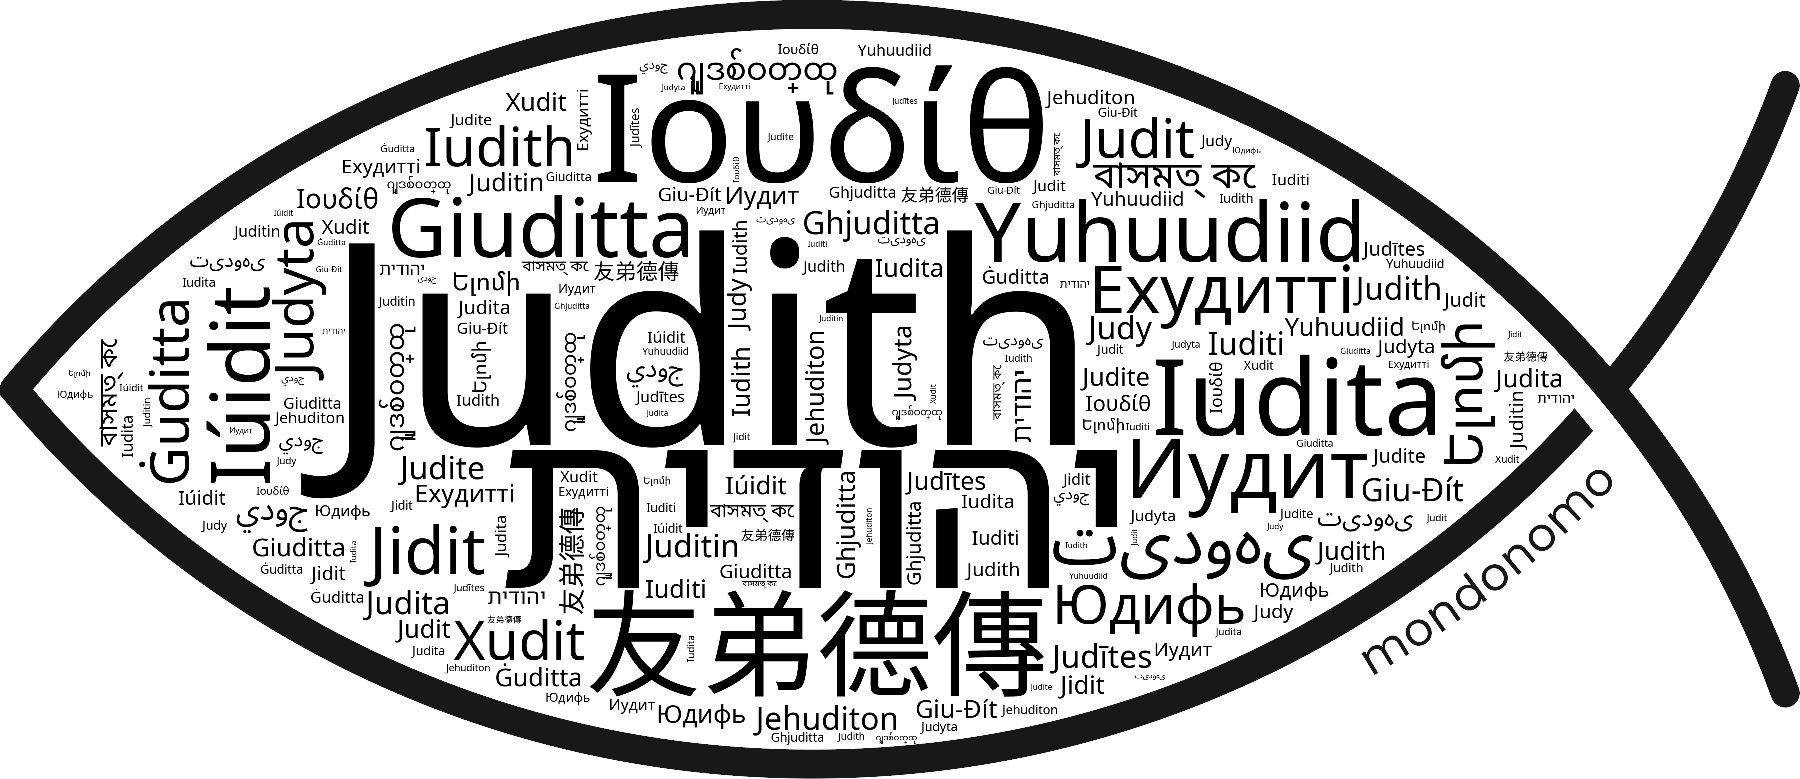 Name Judith in the world's Bibles